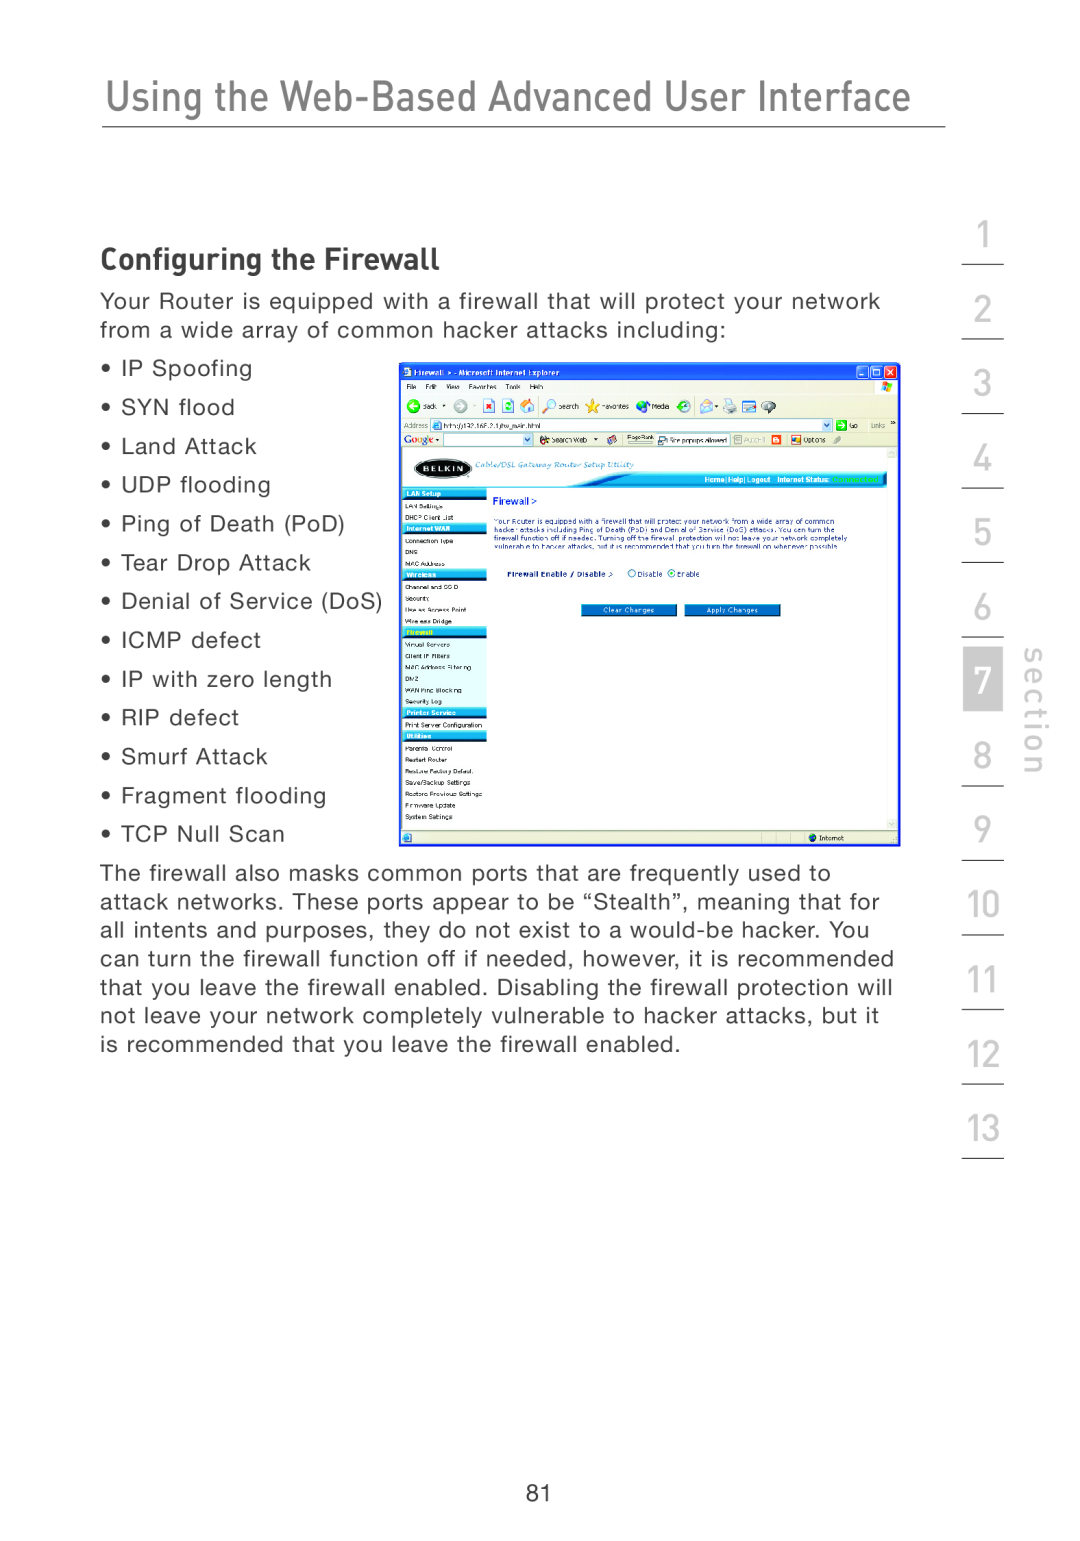 Belkin F5D7231-4P user manual Configuring the Firewall, Using the Web-Based Advanced User Interface, section 